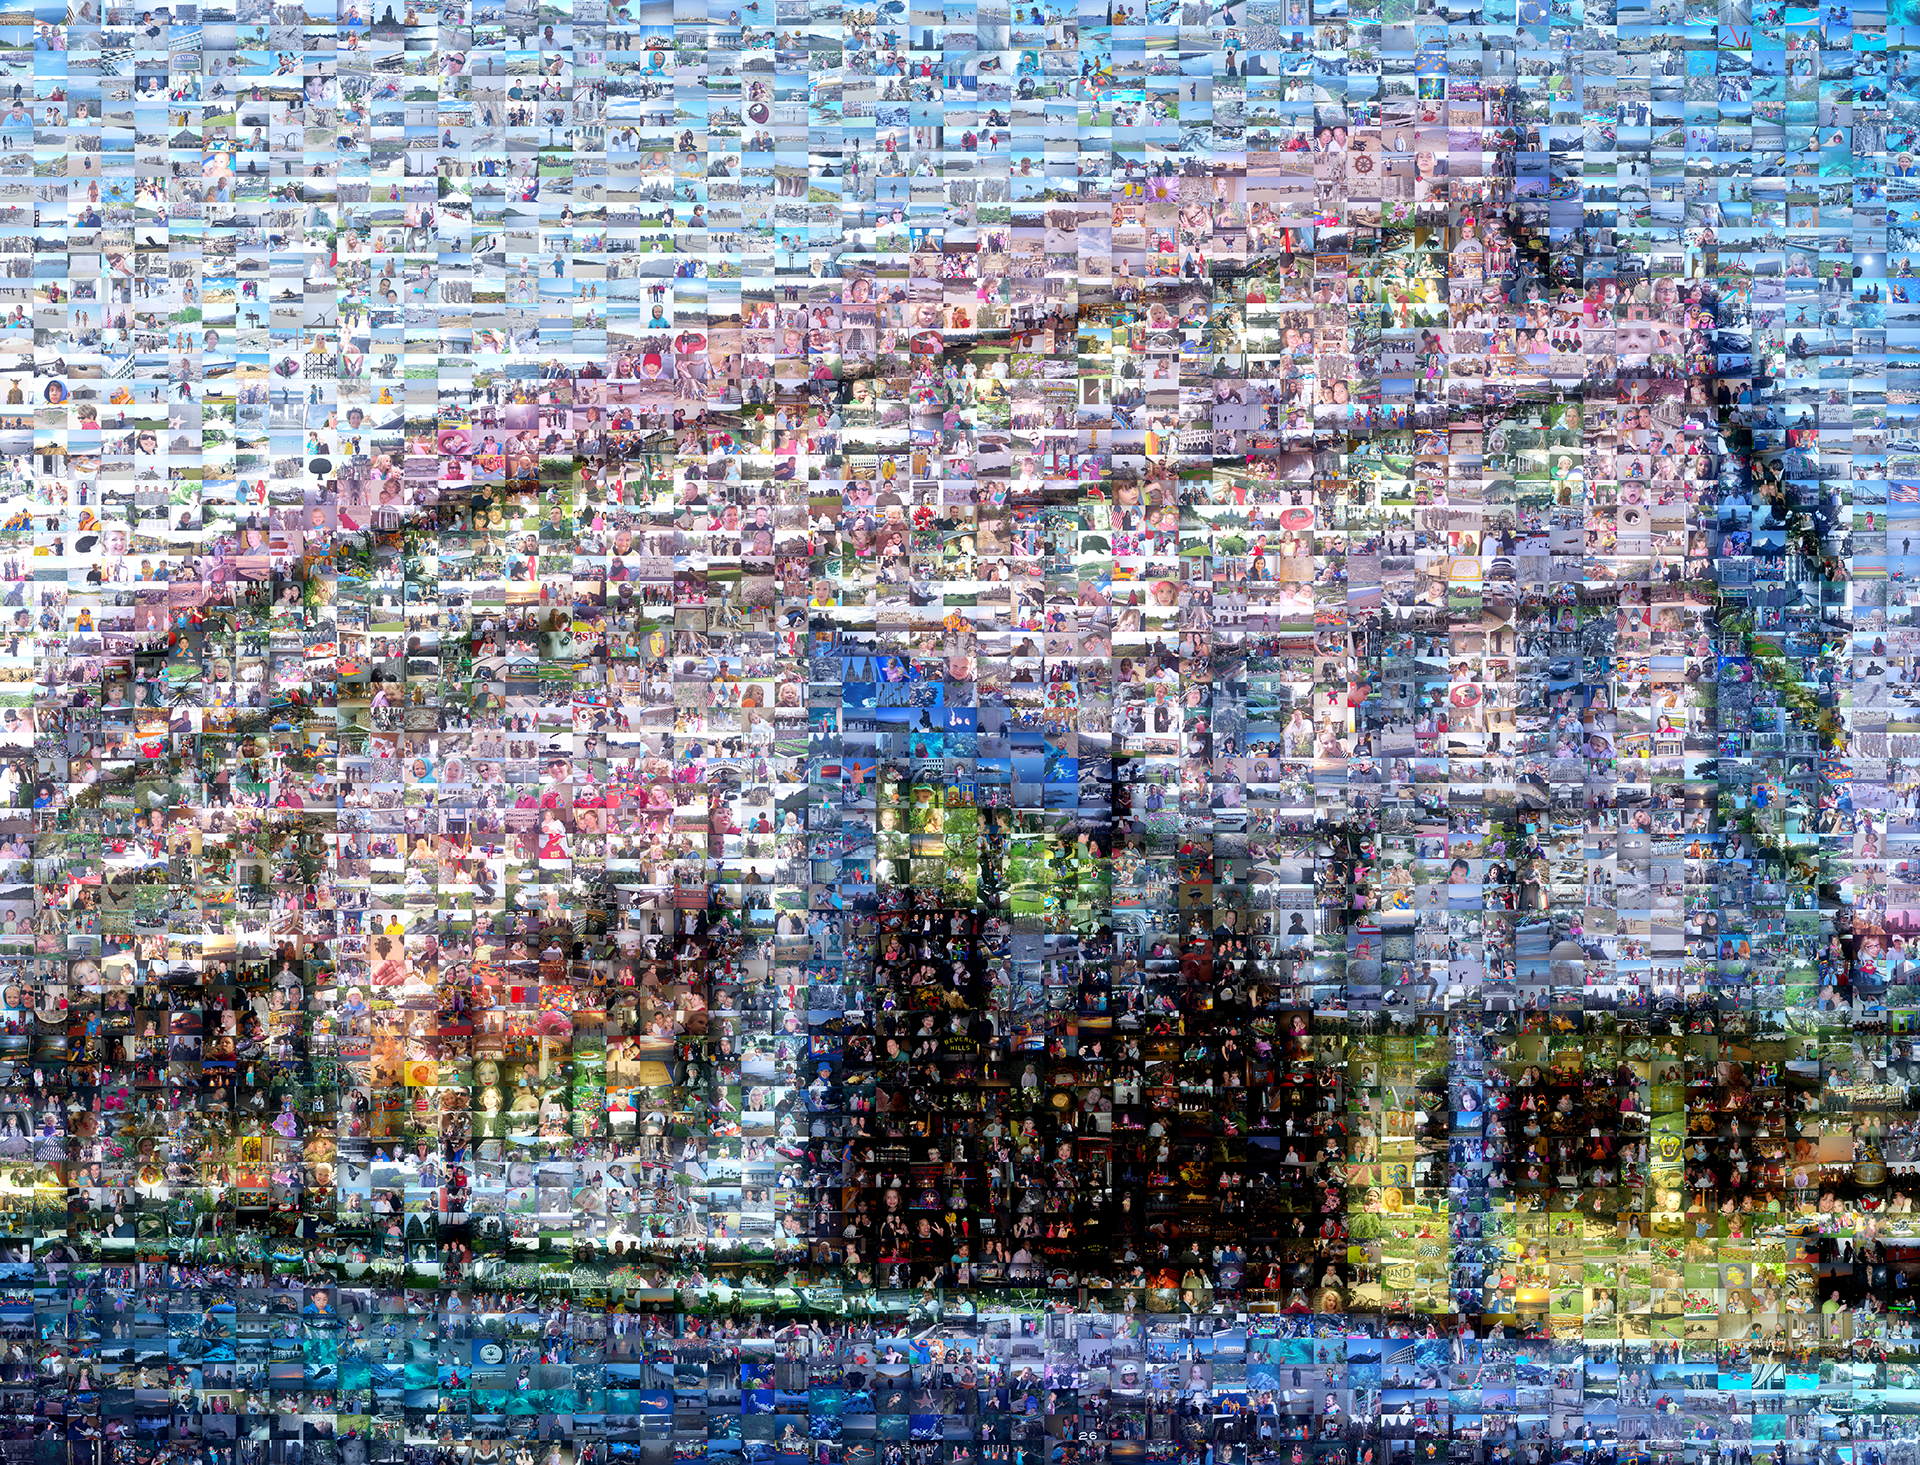 photo mosaic This corporate building was created using 3,628 photos